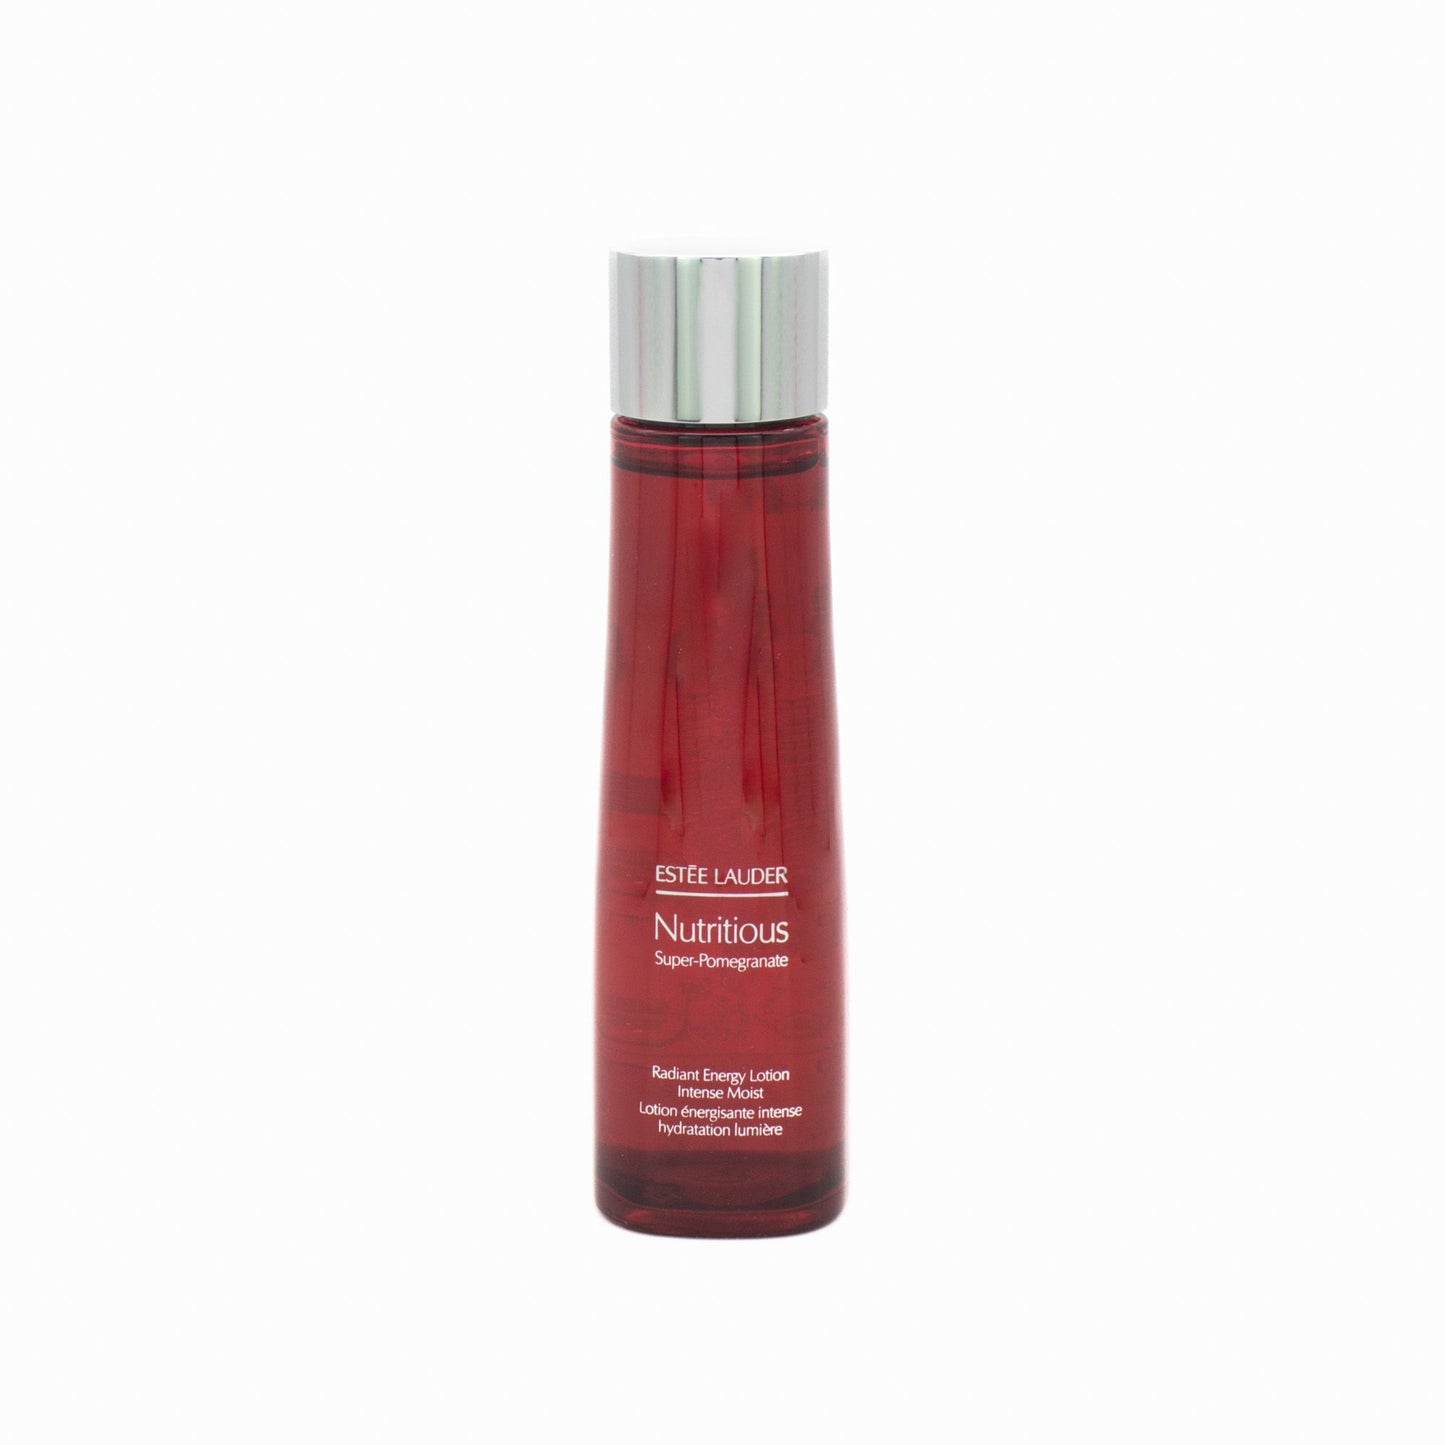 Estee Lauder Nutritious Super Pomegranate Lotion Intense 200ml - Missing Box - This is Beauty UK